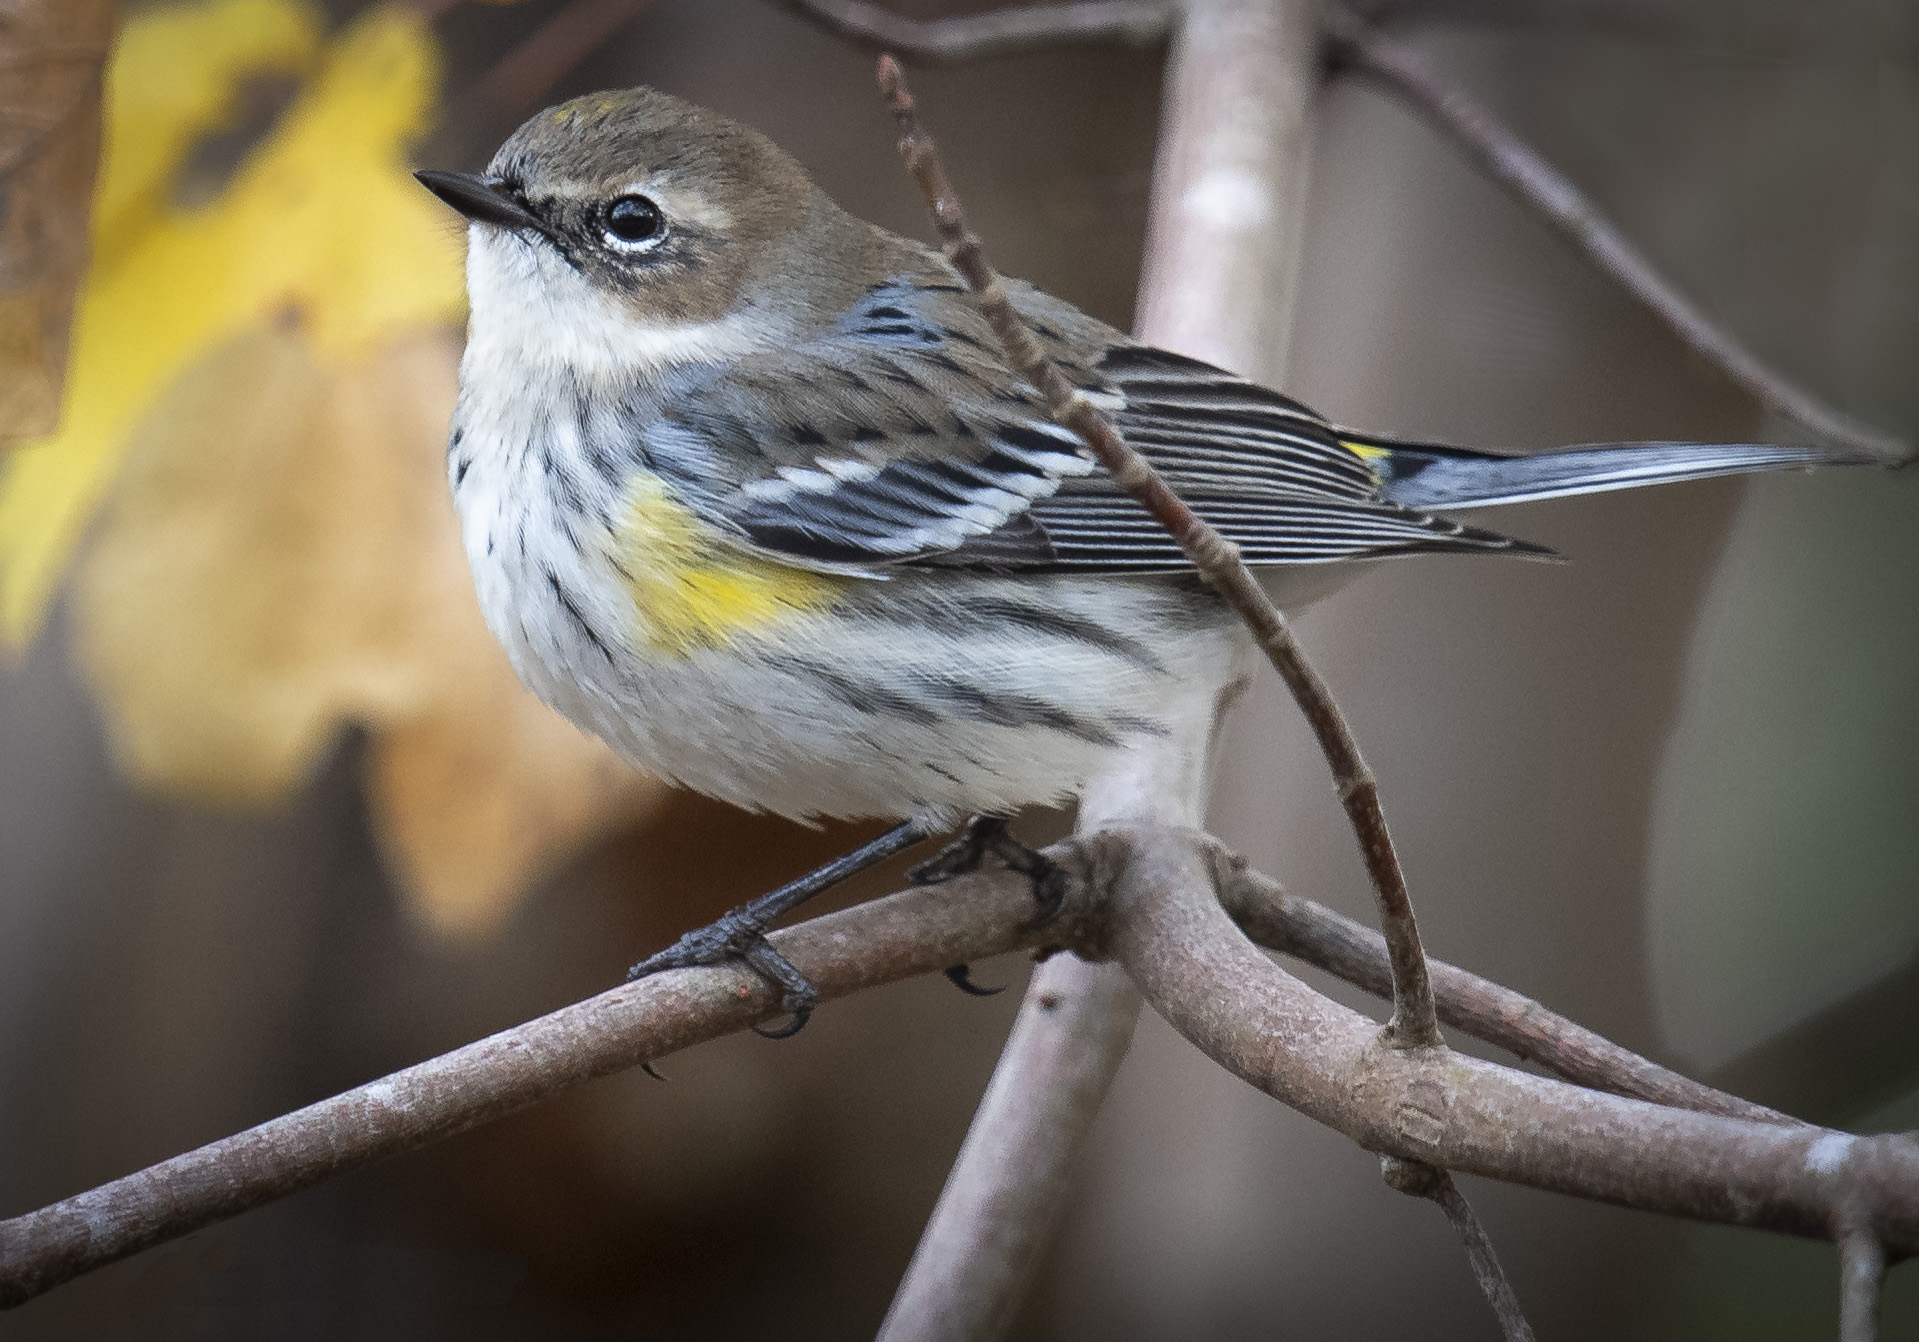 A yellow-rumped warbler perched on a branch